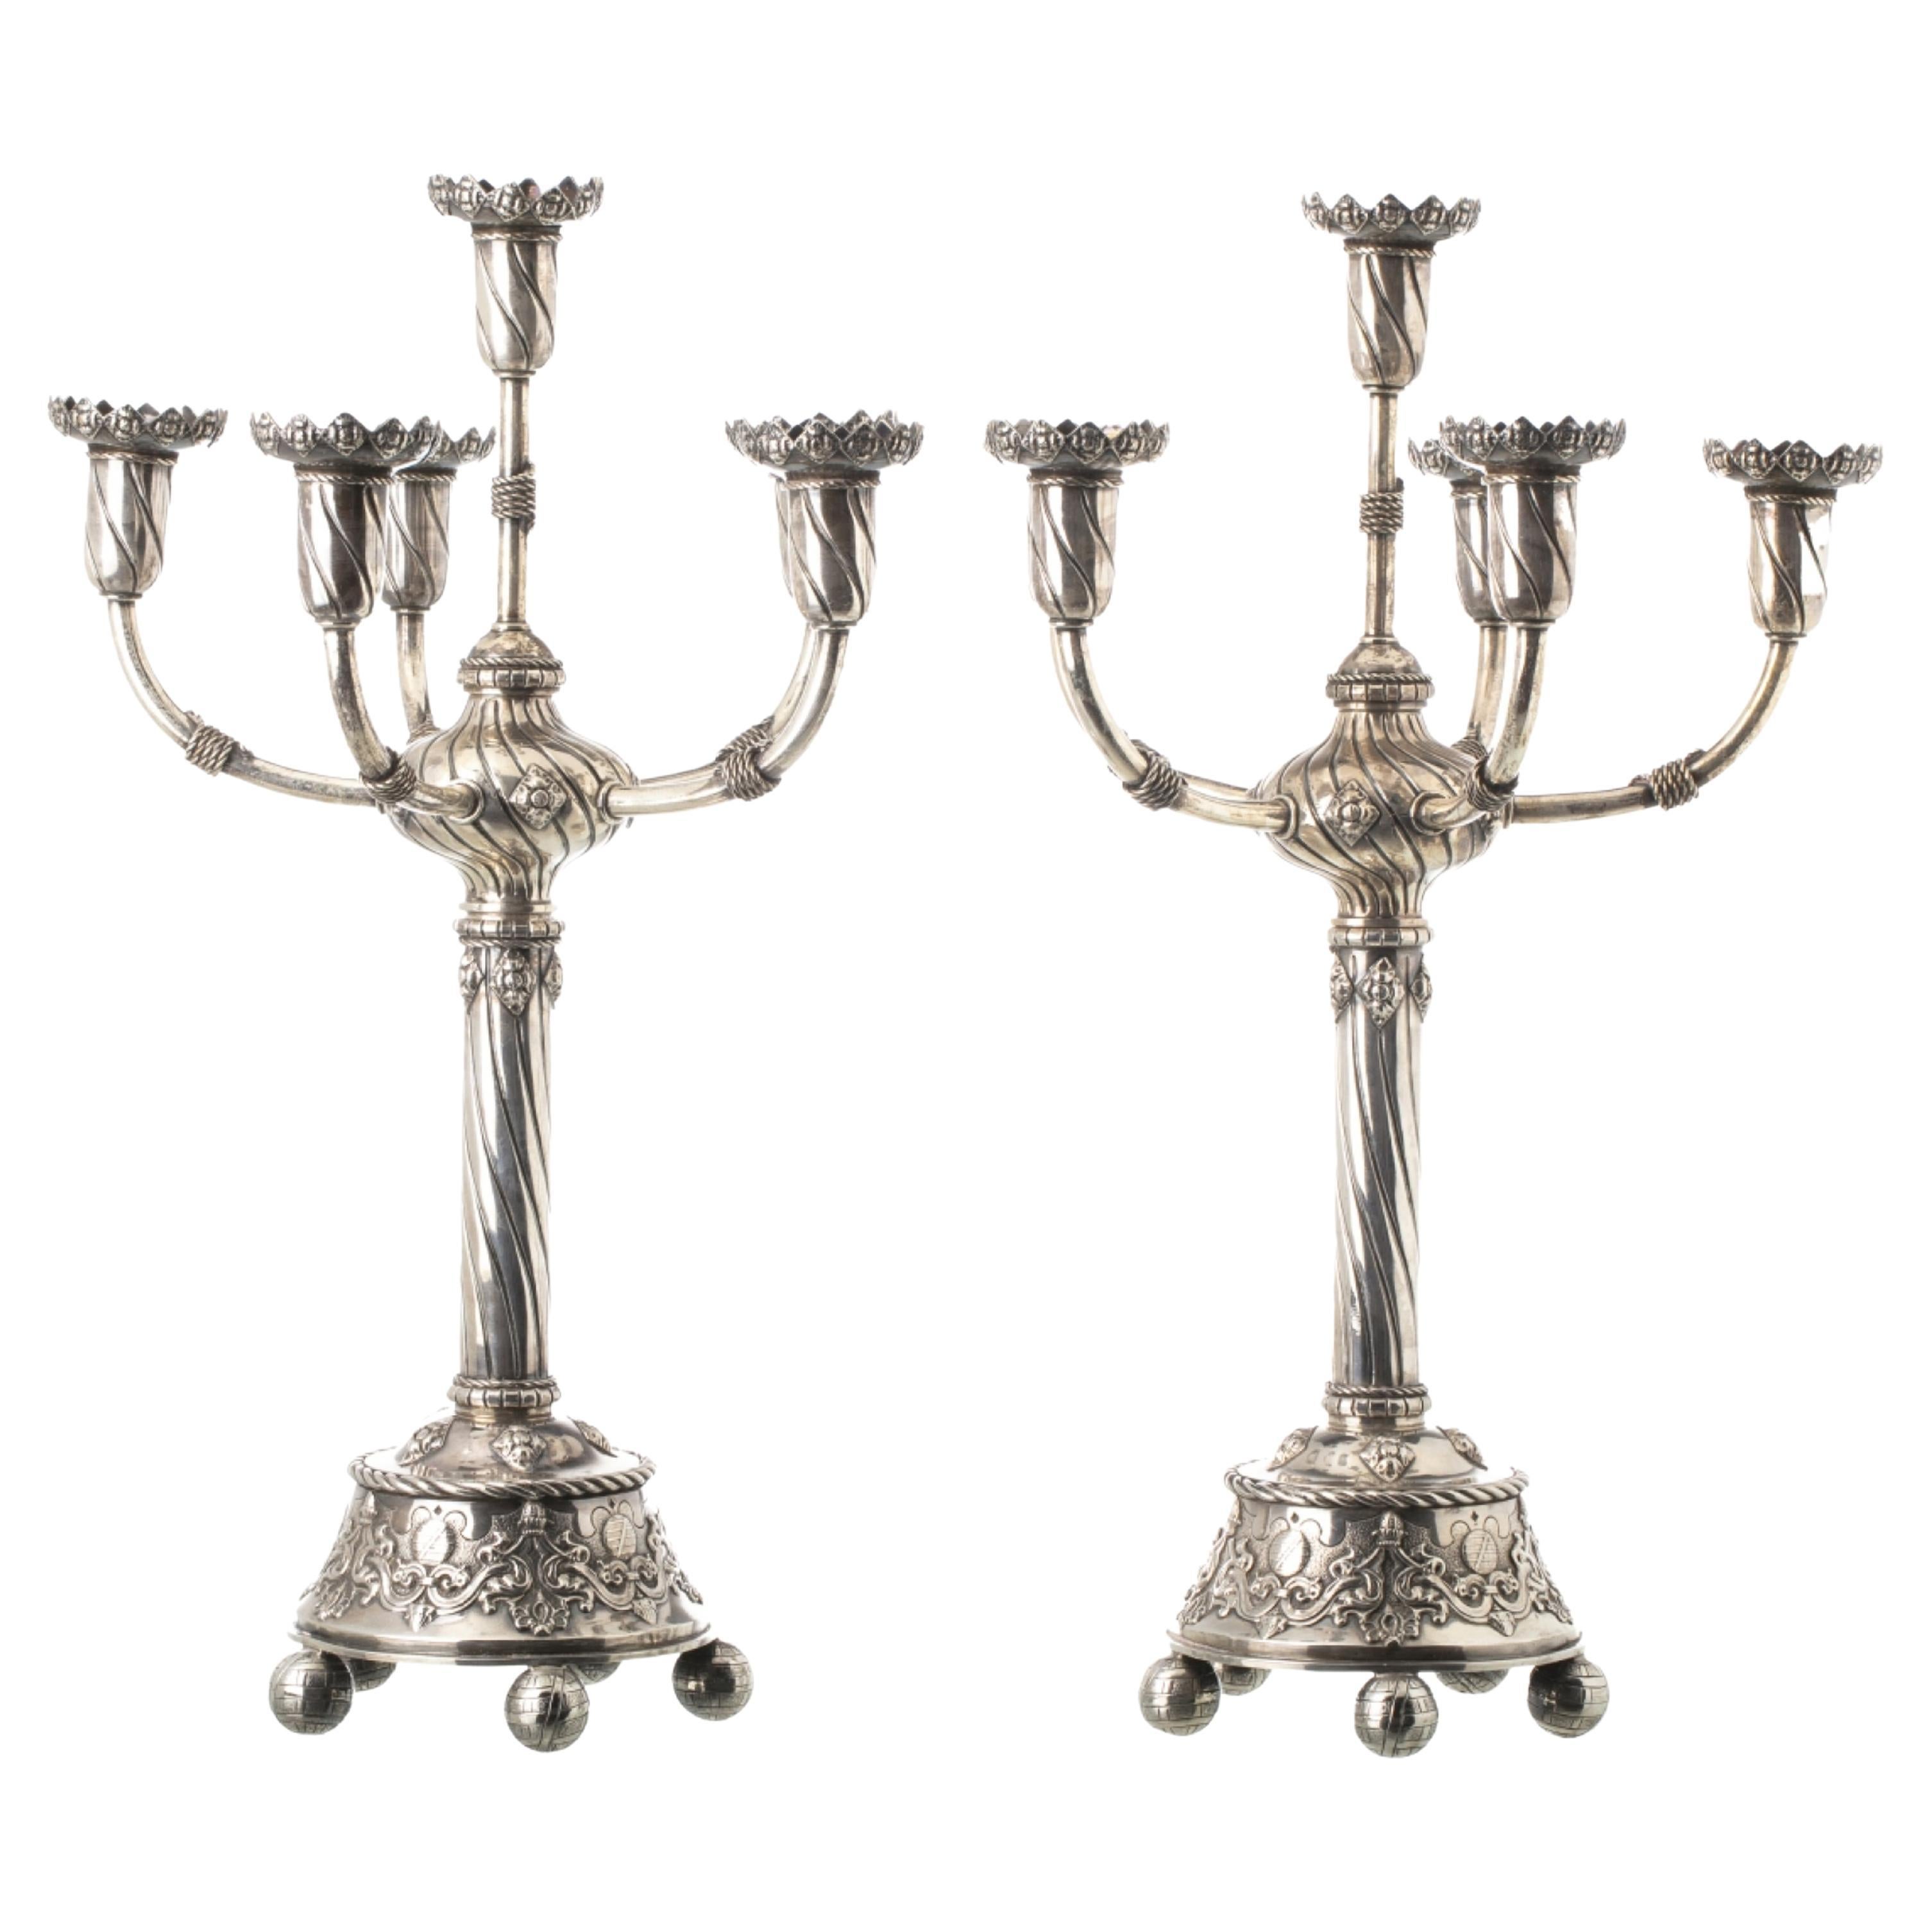 PAIR OF PORTUGUESE FIVE-LIGHT SILVER CANDLESTICKS 19th Century